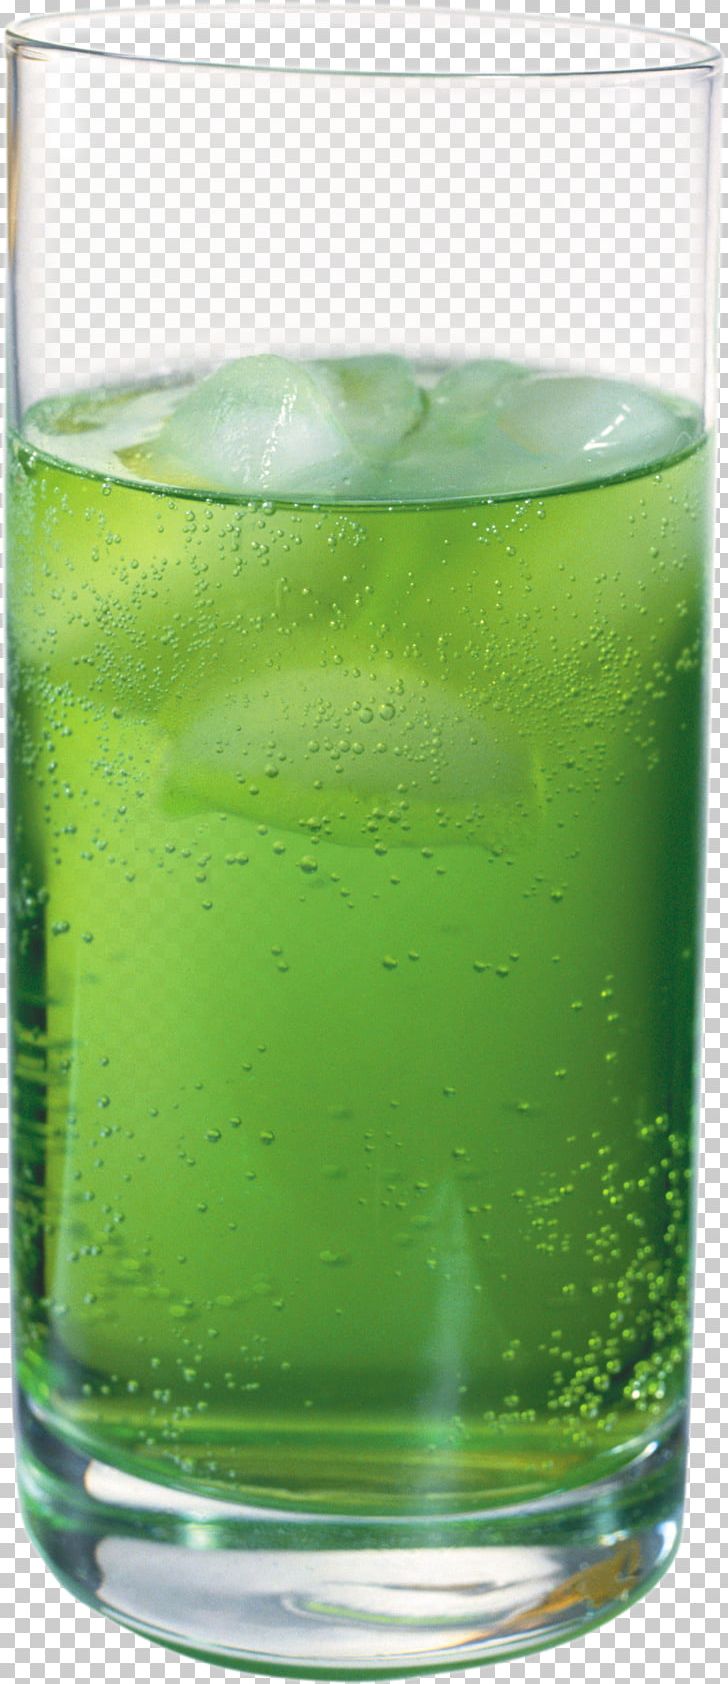 Fizzy Drinks Cocktail Juice Non-alcoholic Drink Lemon-lime Drink PNG, Clipart, Alcoholic Drink, Cocktail, Drink, Fizzy Drinks, Food Drinks Free PNG Download